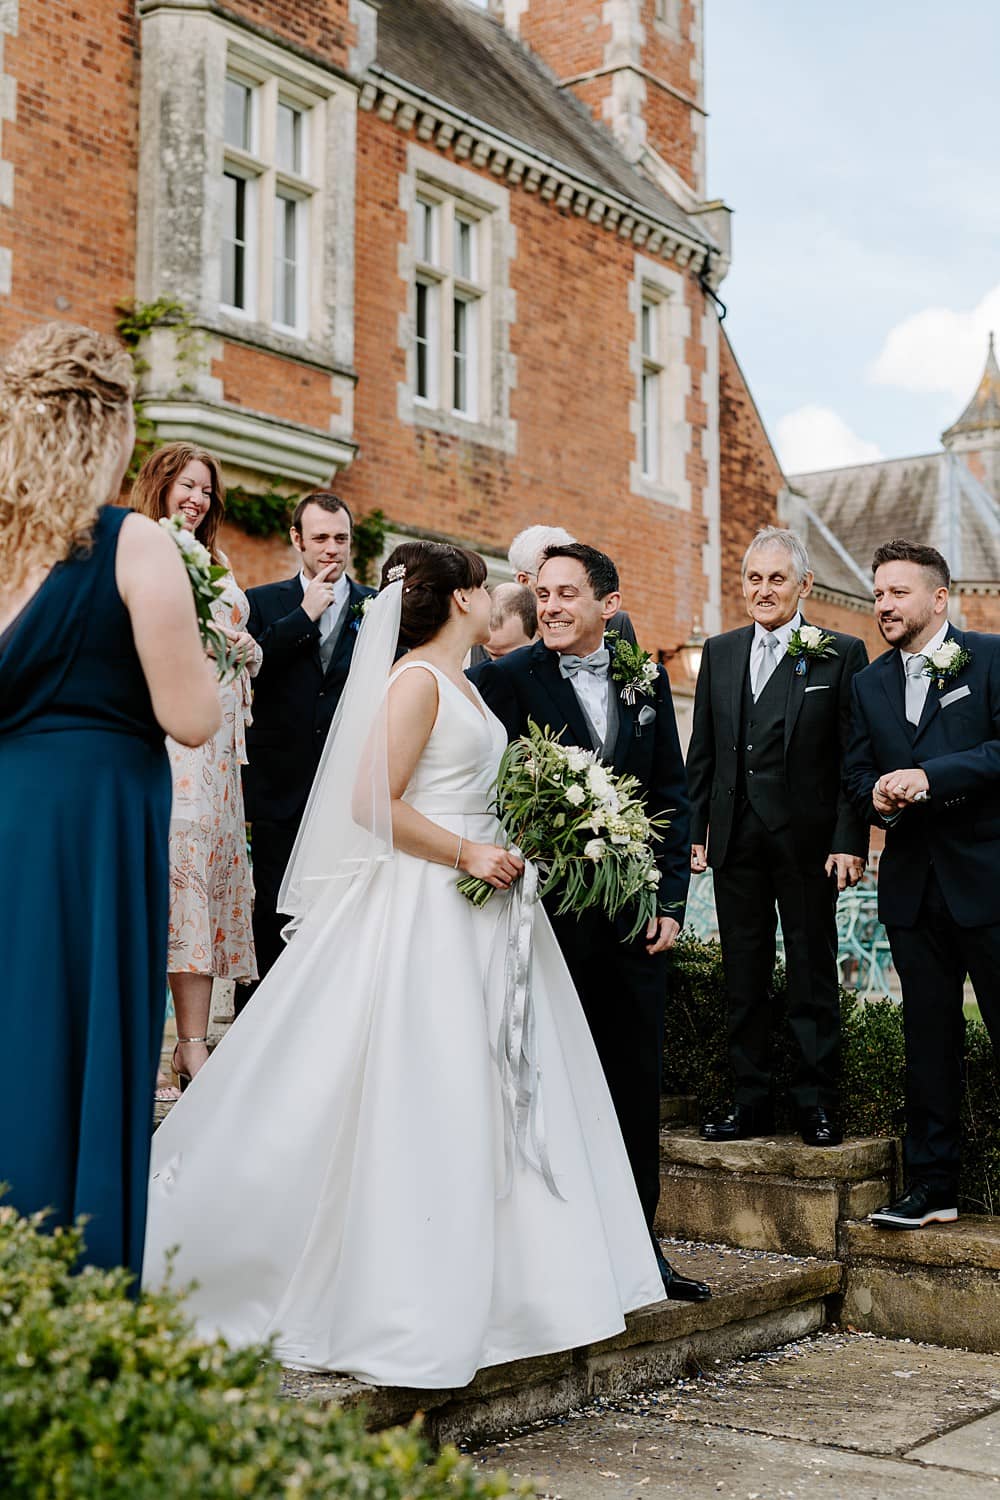 5 Reasons We’ll Never Forget this Autumn Wedding at Thicket Priory!